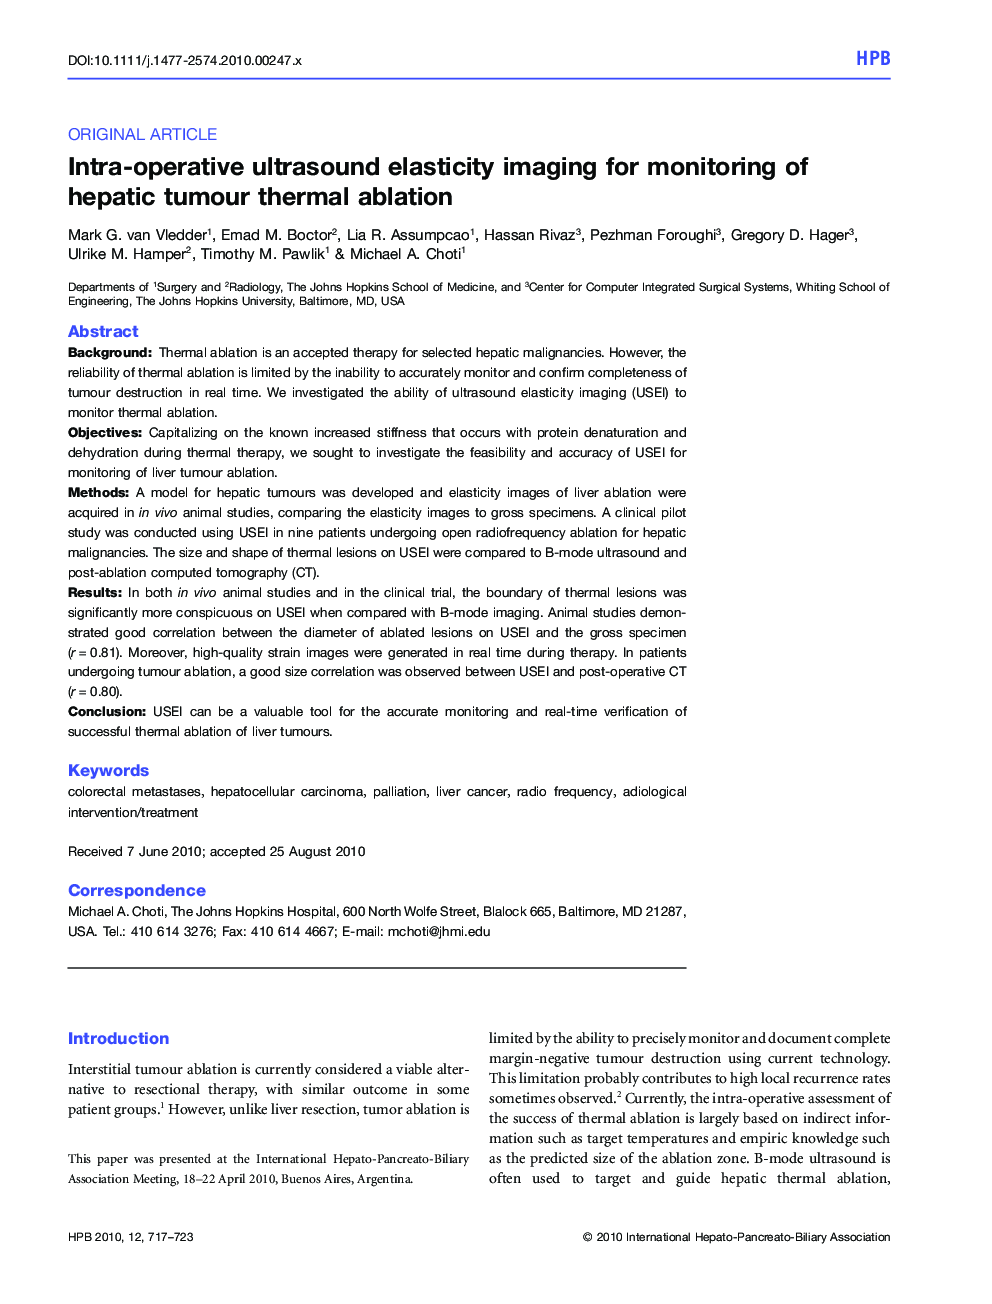 Intra-operative ultrasound elasticity imaging for monitoring of hepatic tumour thermal ablation